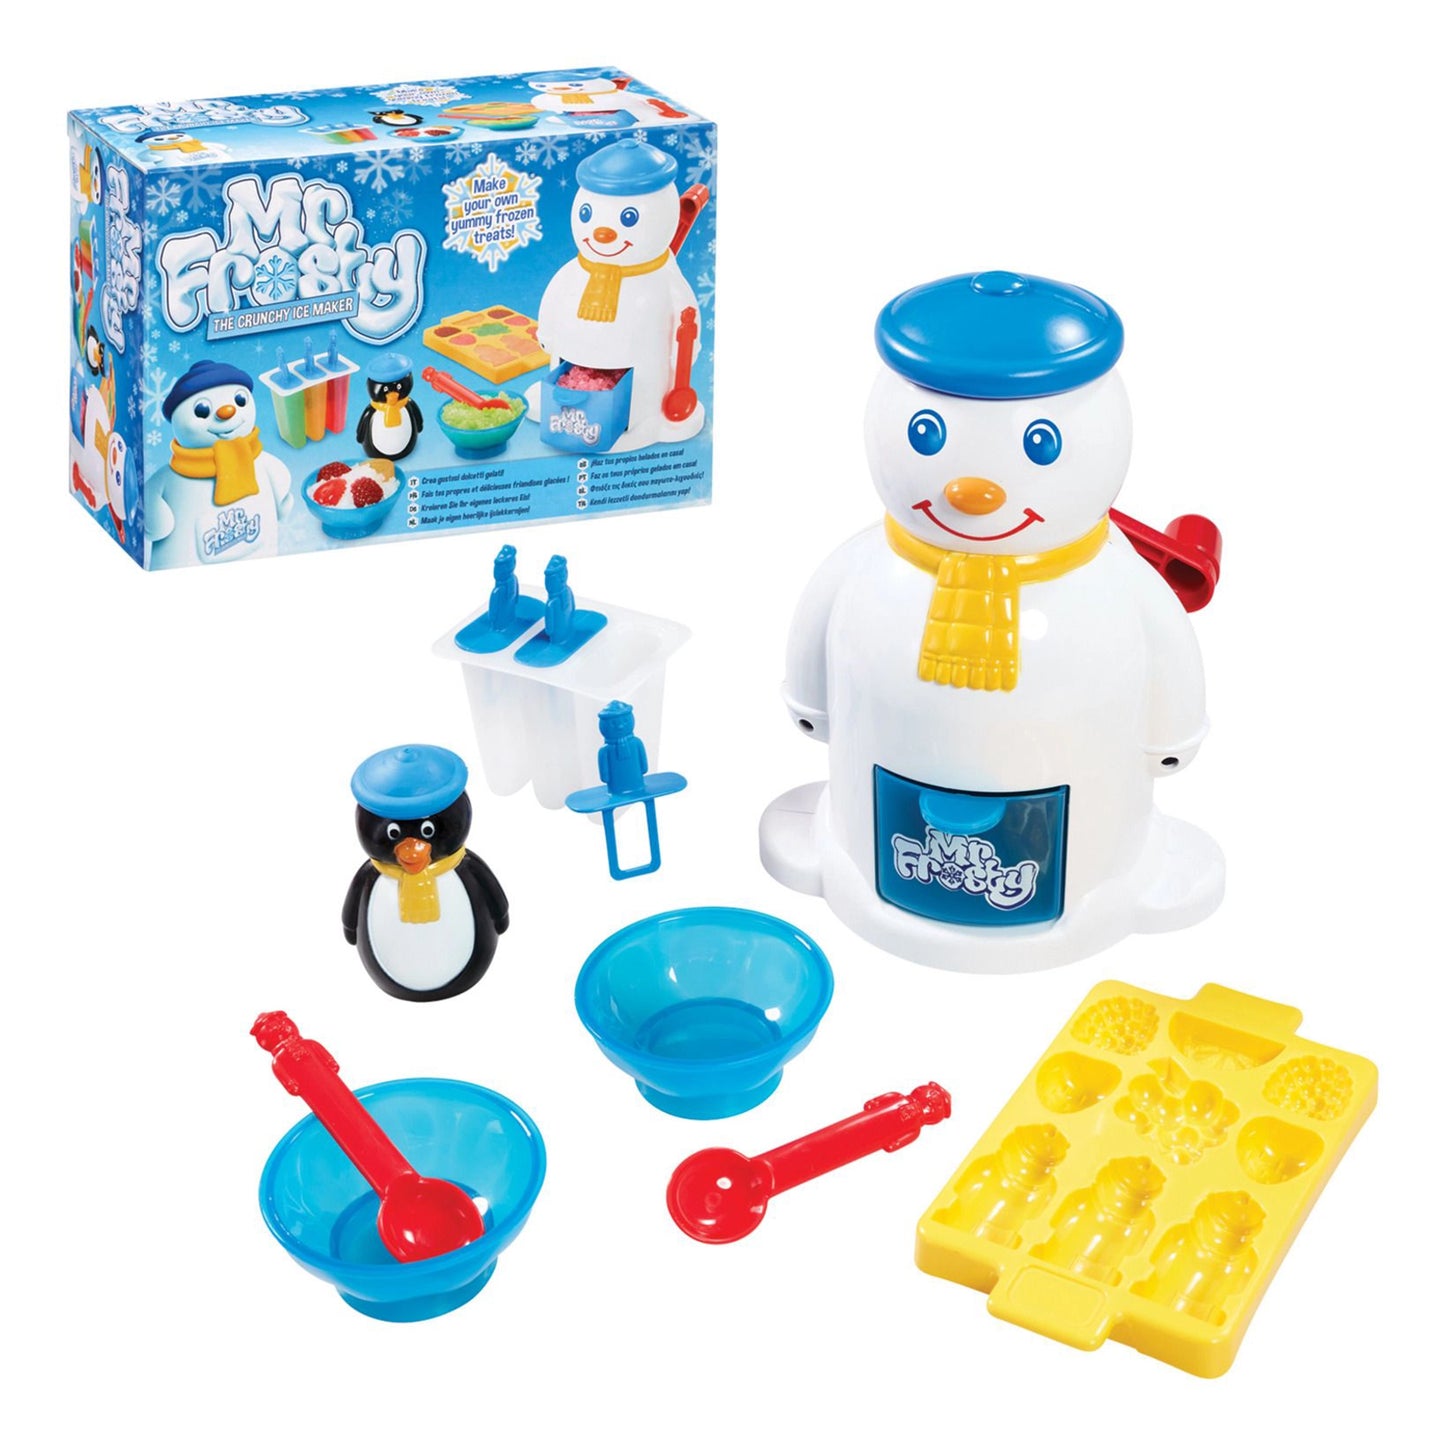   Mr Frosty The Crunchy Ice Maker - ABGee - The Forgotten Toy Shop